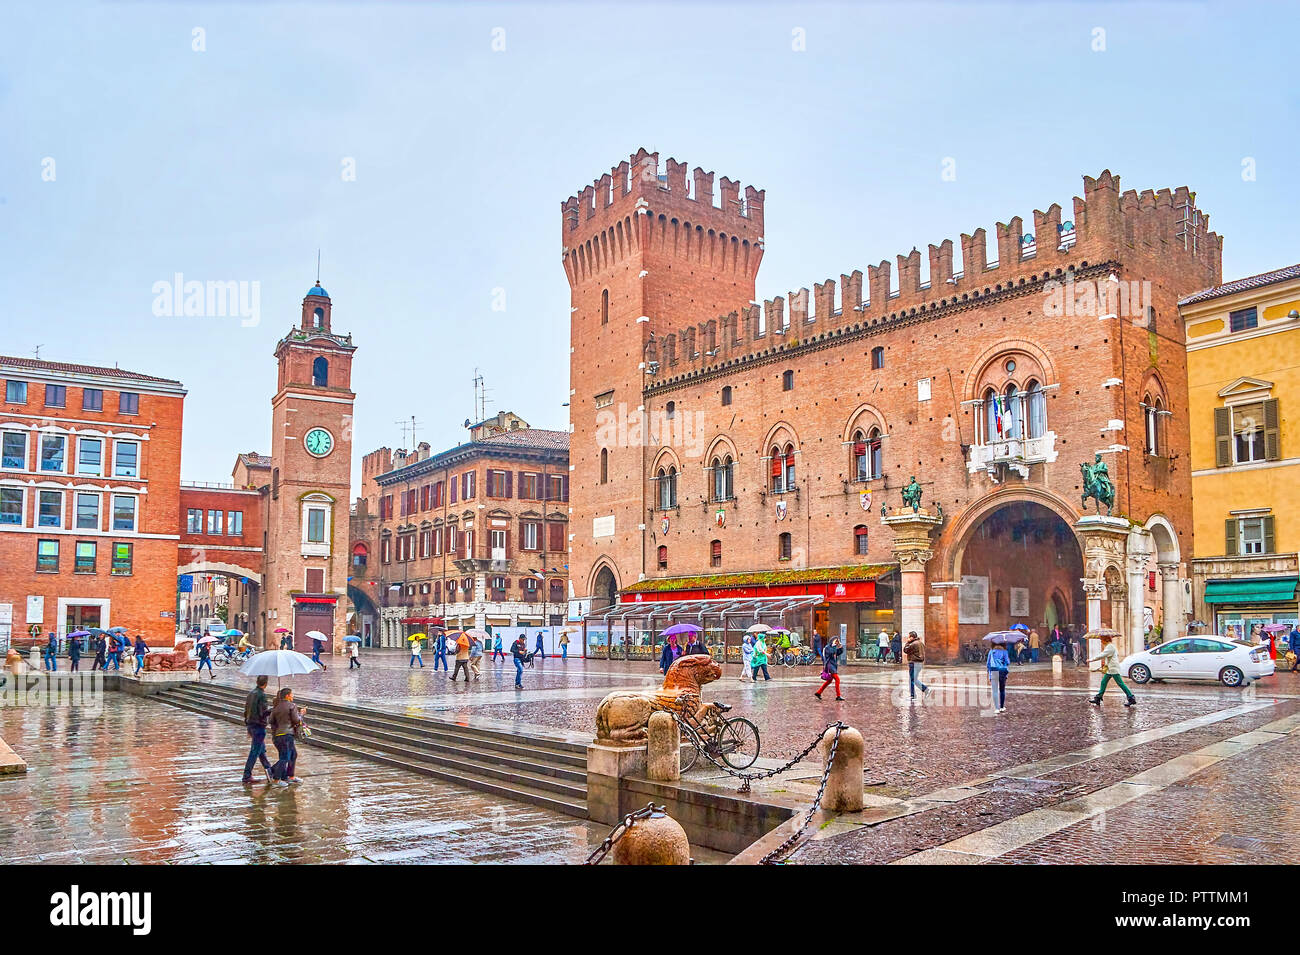 FERRARA, ITALY - APRIL 30, 2013: Piazza della Cattedrale is the central sqaure in the city with main tourist landmarks on it, on April 30 in Ferrara Stock Photo